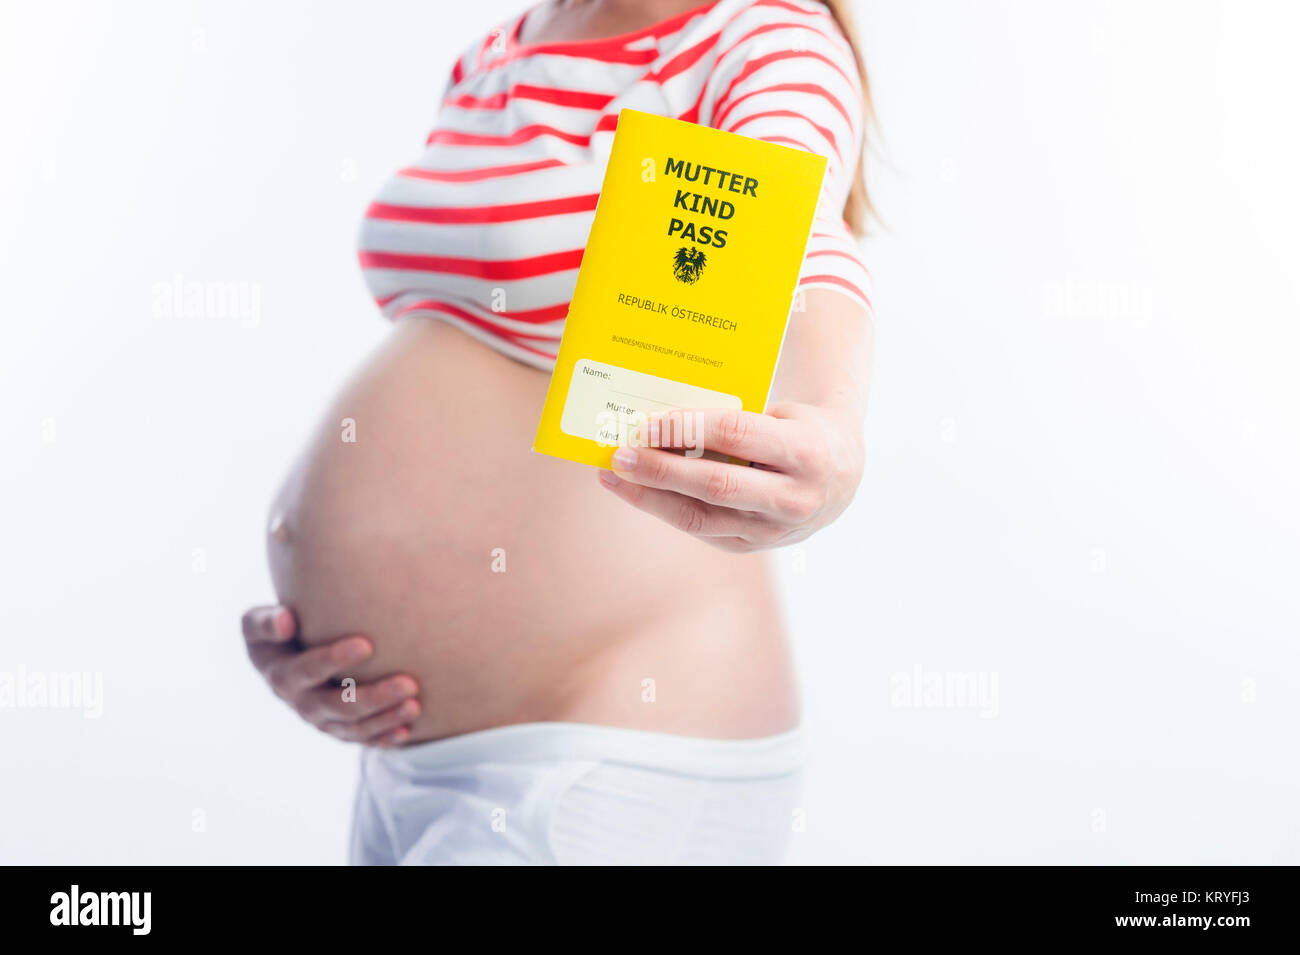 Schwangere Frau mit Mutter-Kind-Pass - pregnant woman with Mother-Child-Pass Stock Photo